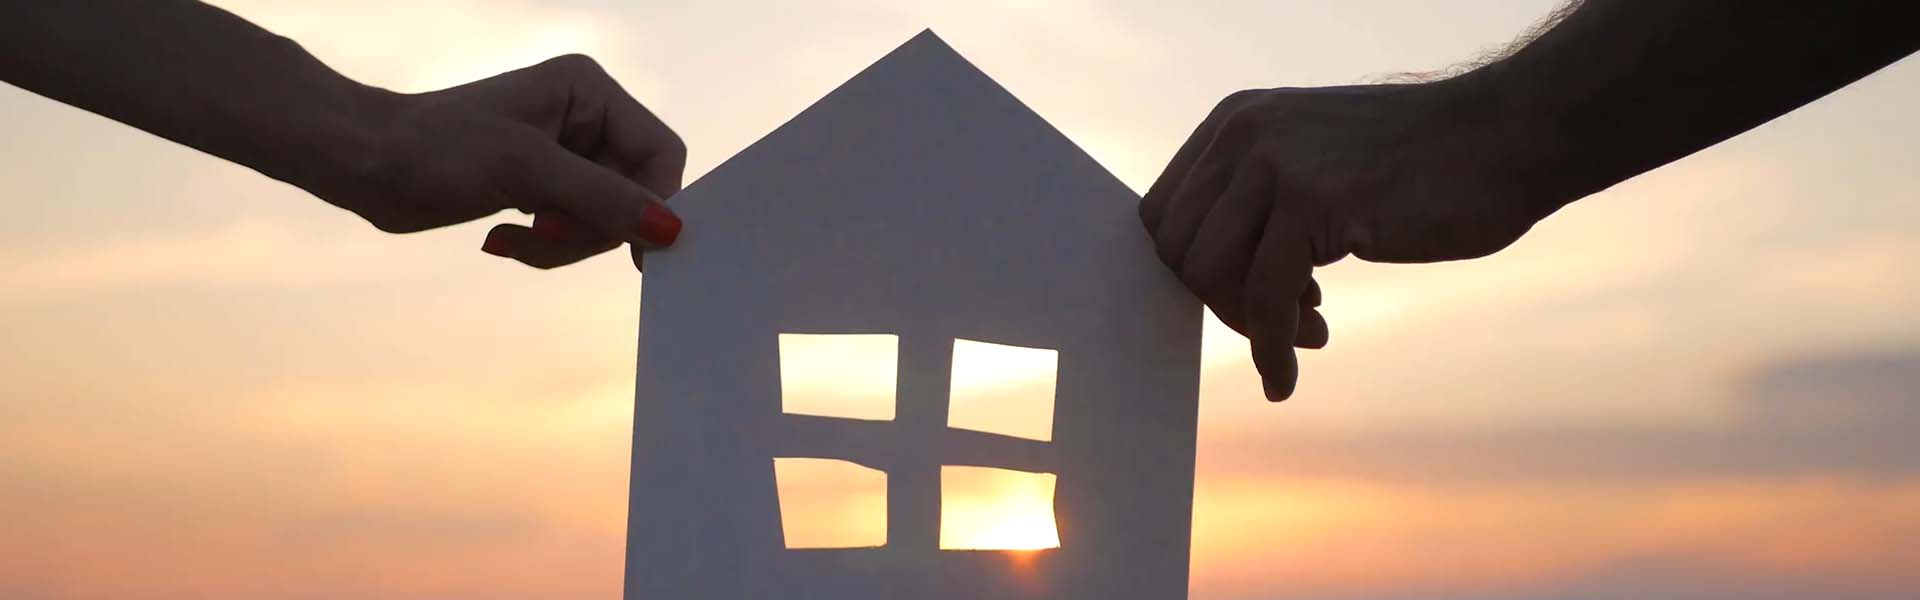 Two hands holding a cut out of a paper house against a sunset.